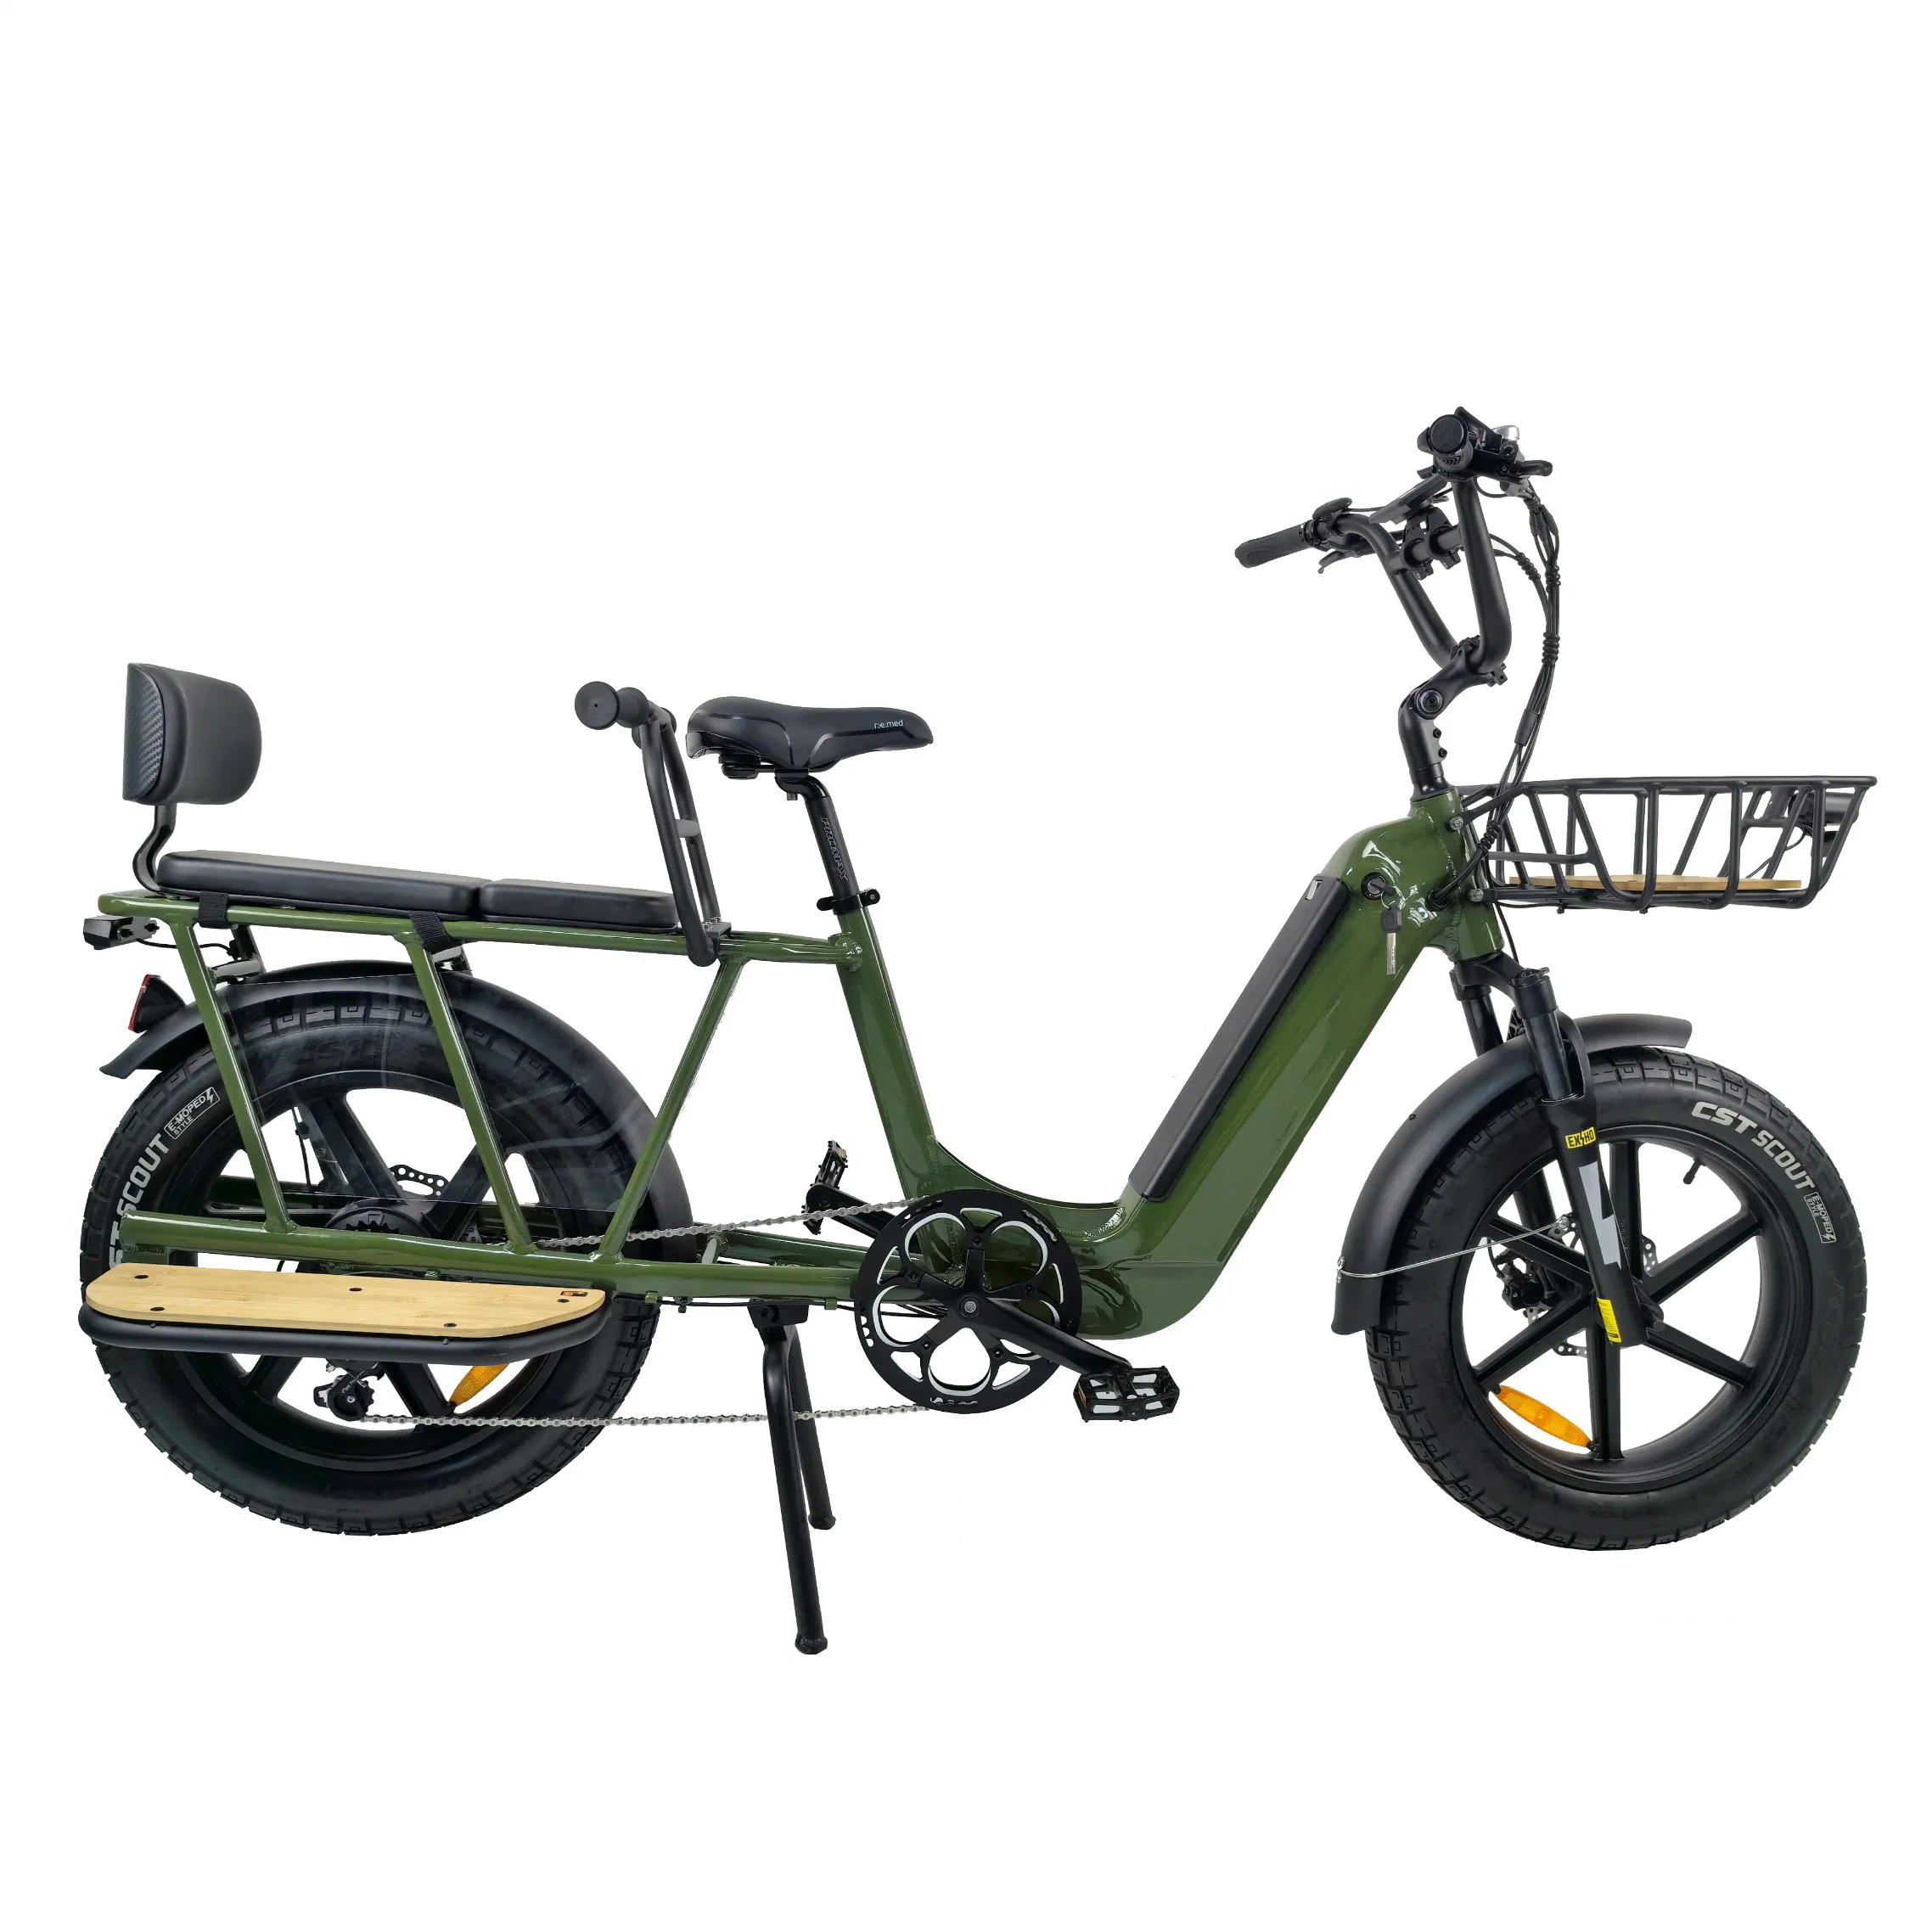 Queene/20 Inch Fat Tire Food Delivery Electric Bike Cargo Ebike 48V 750W High Speed Motor Electric Cargo Bike Utility Family